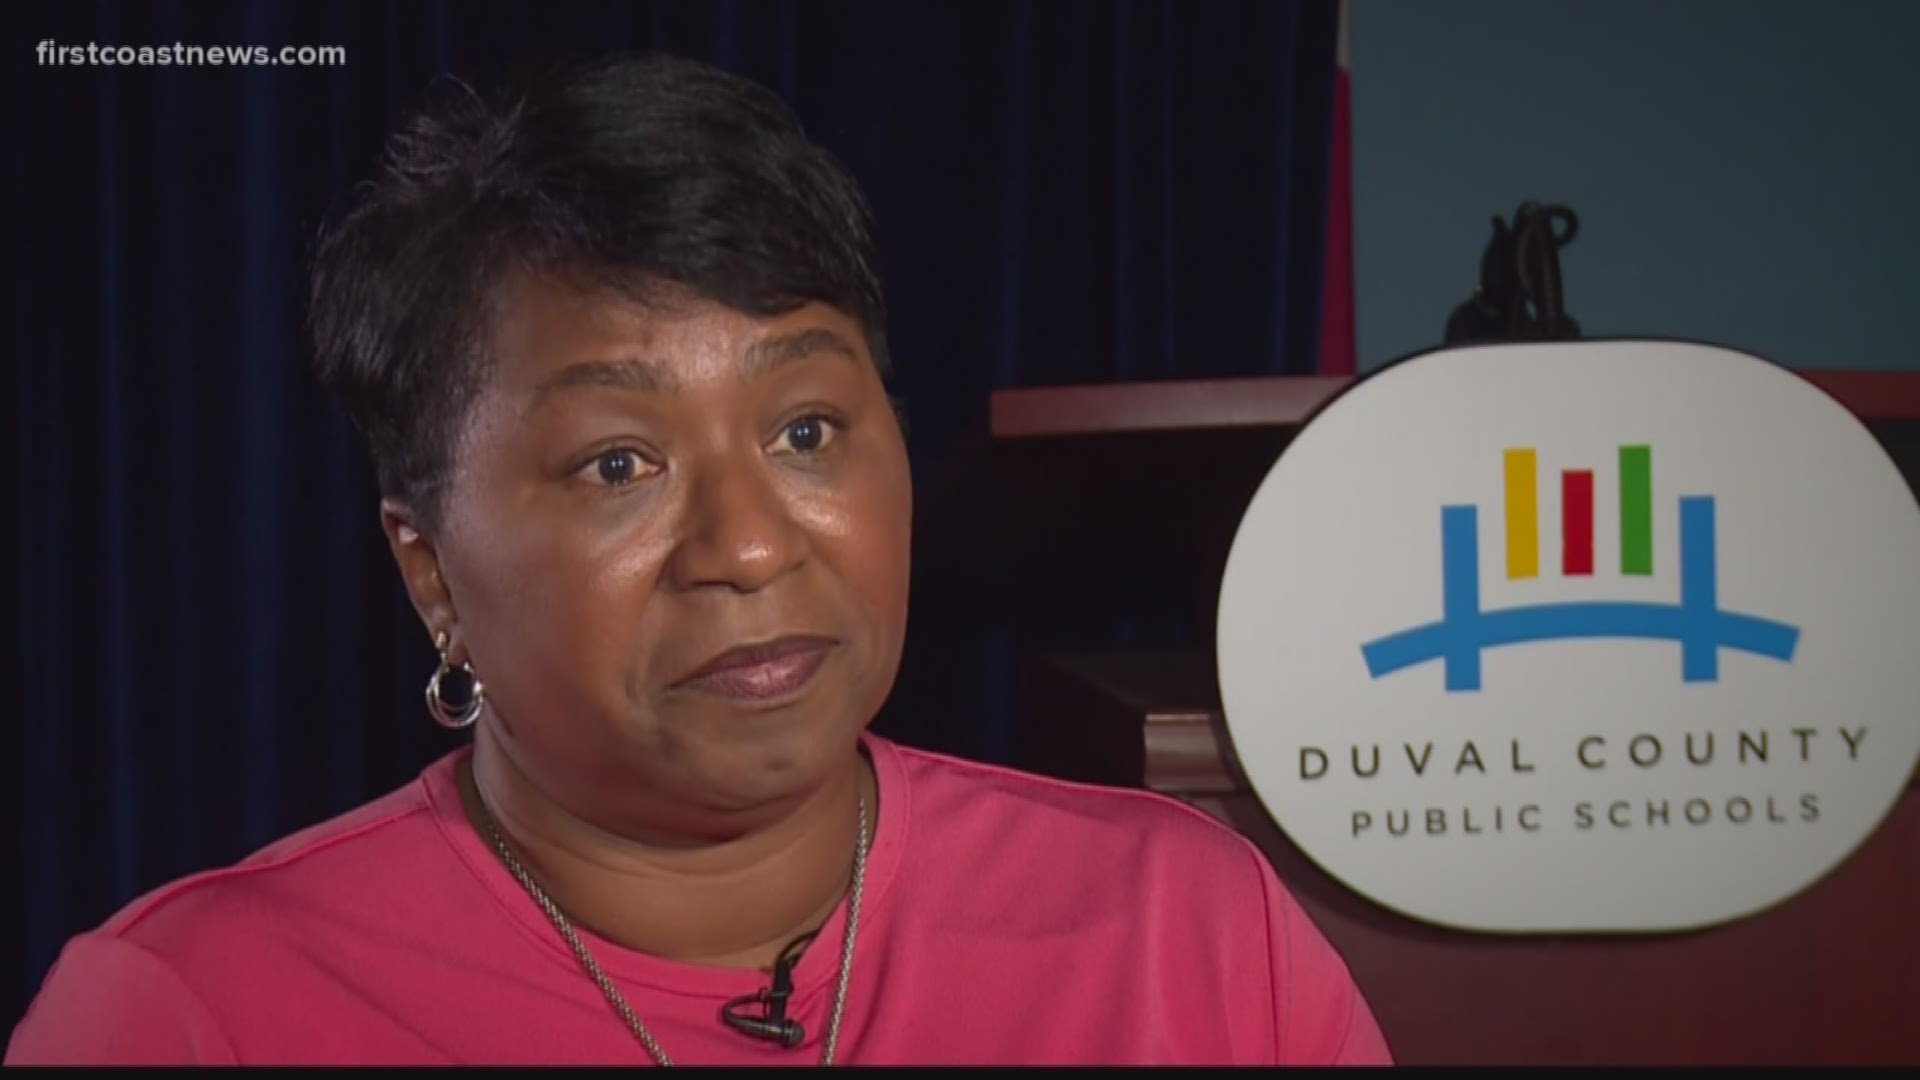 FCN's Juliette Dryer spoke with the superintendent of Duval County Schools about violence in the district.